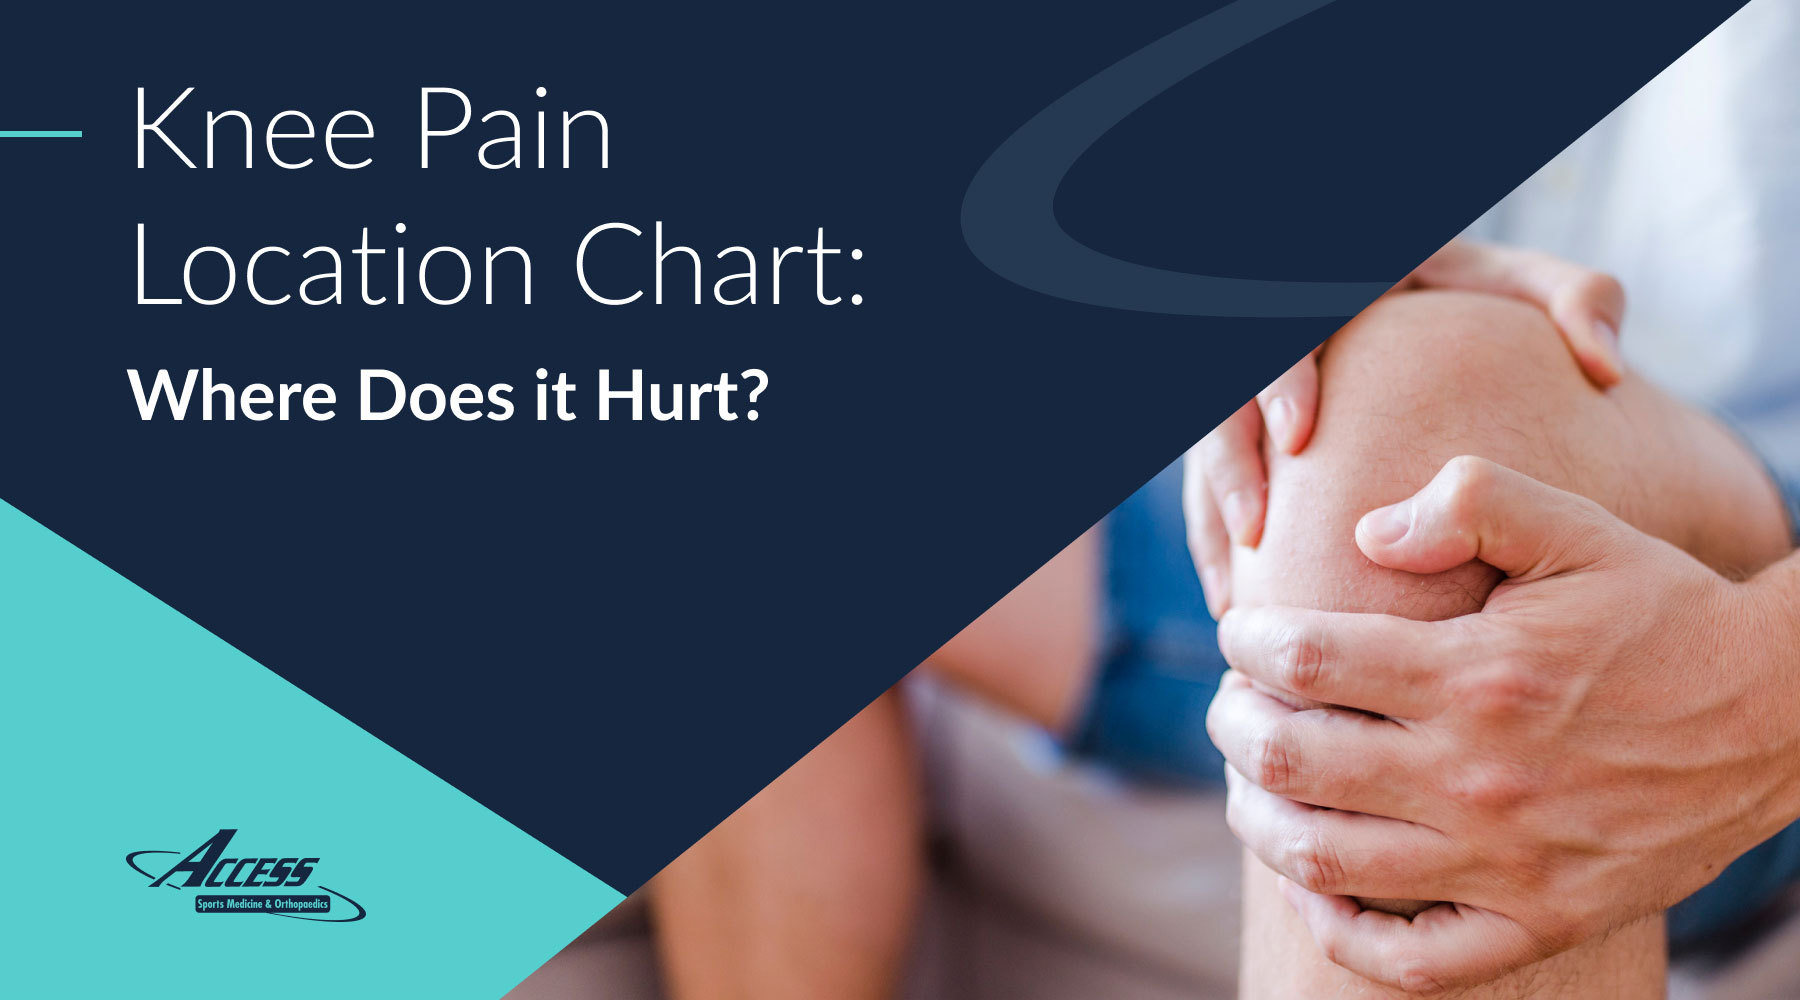 Knee Pain Location Chart: Where Does it Hurt?